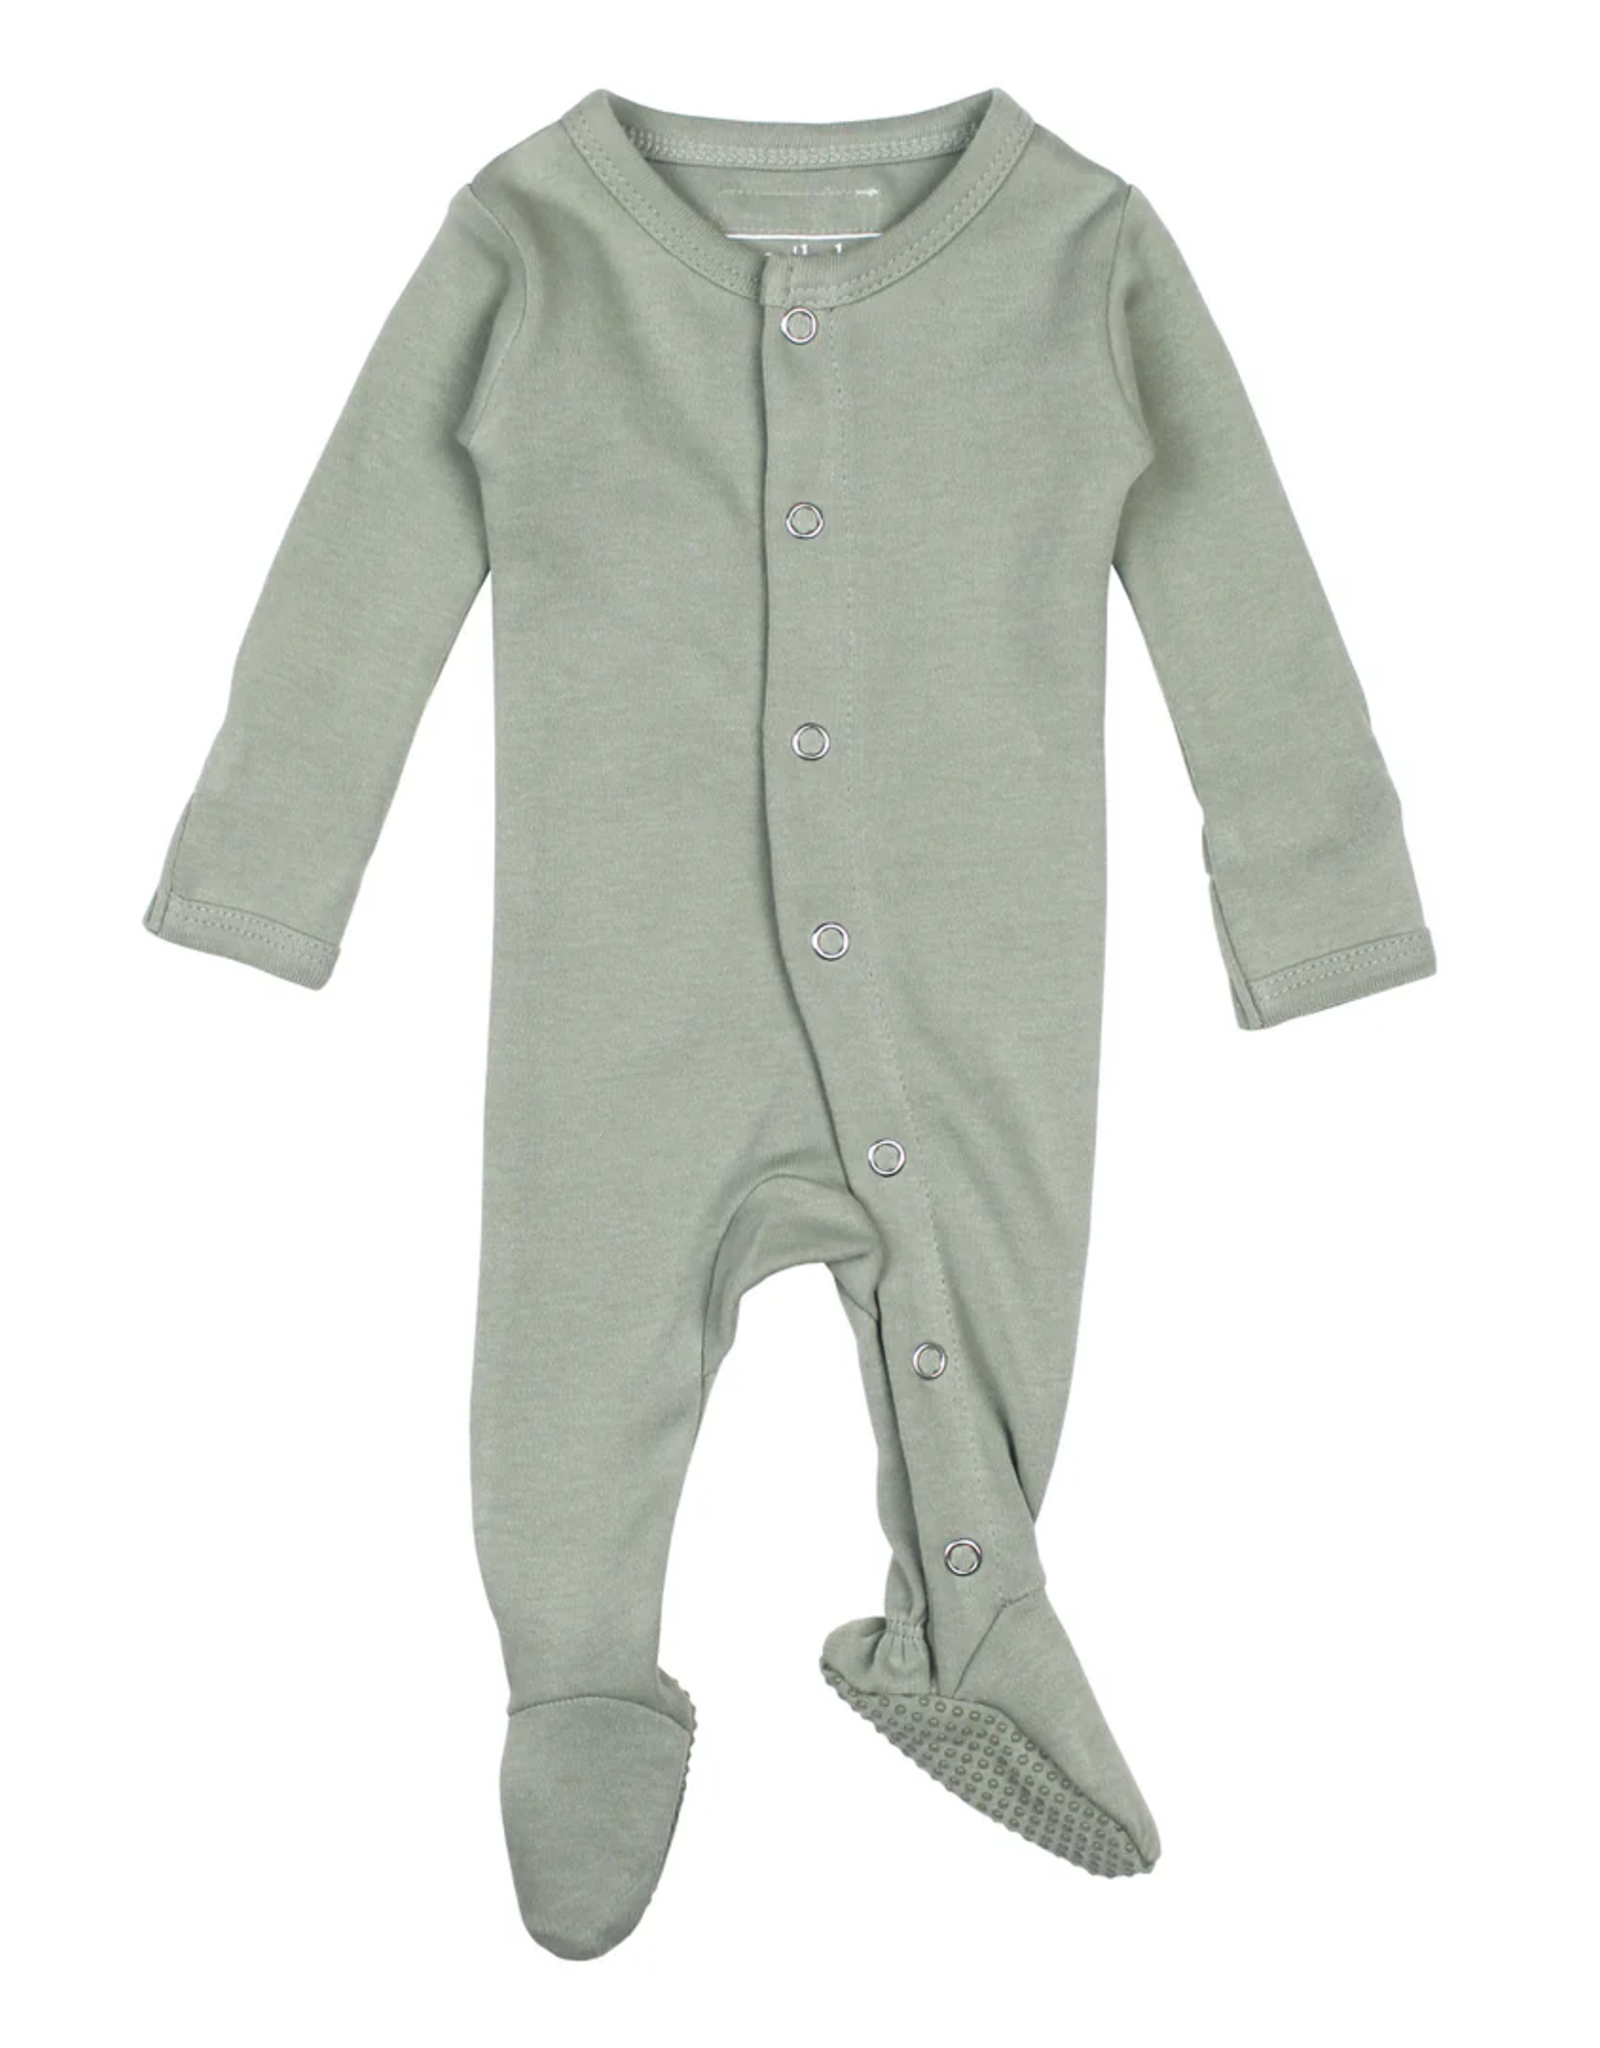 L'oved Baby Organic Snap Footie Seafoam